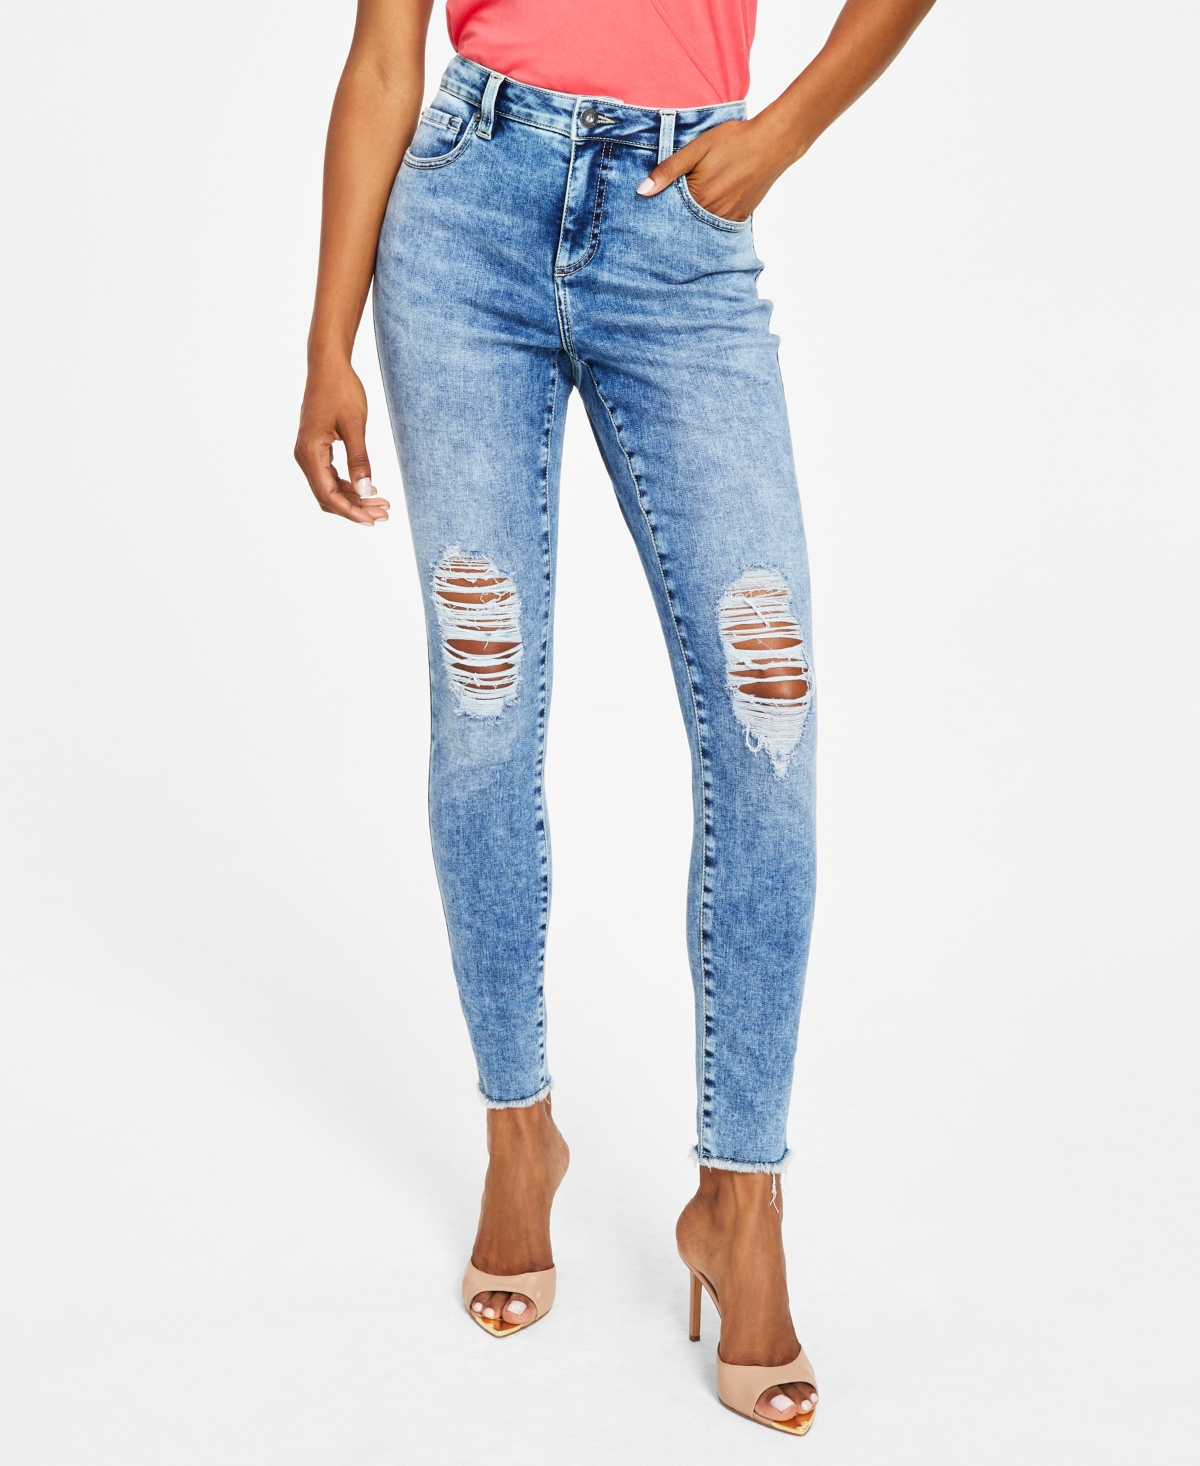  Inc International Concepts Women's Mid-Rise Destructed Skinny Jeans, Created for Macy's